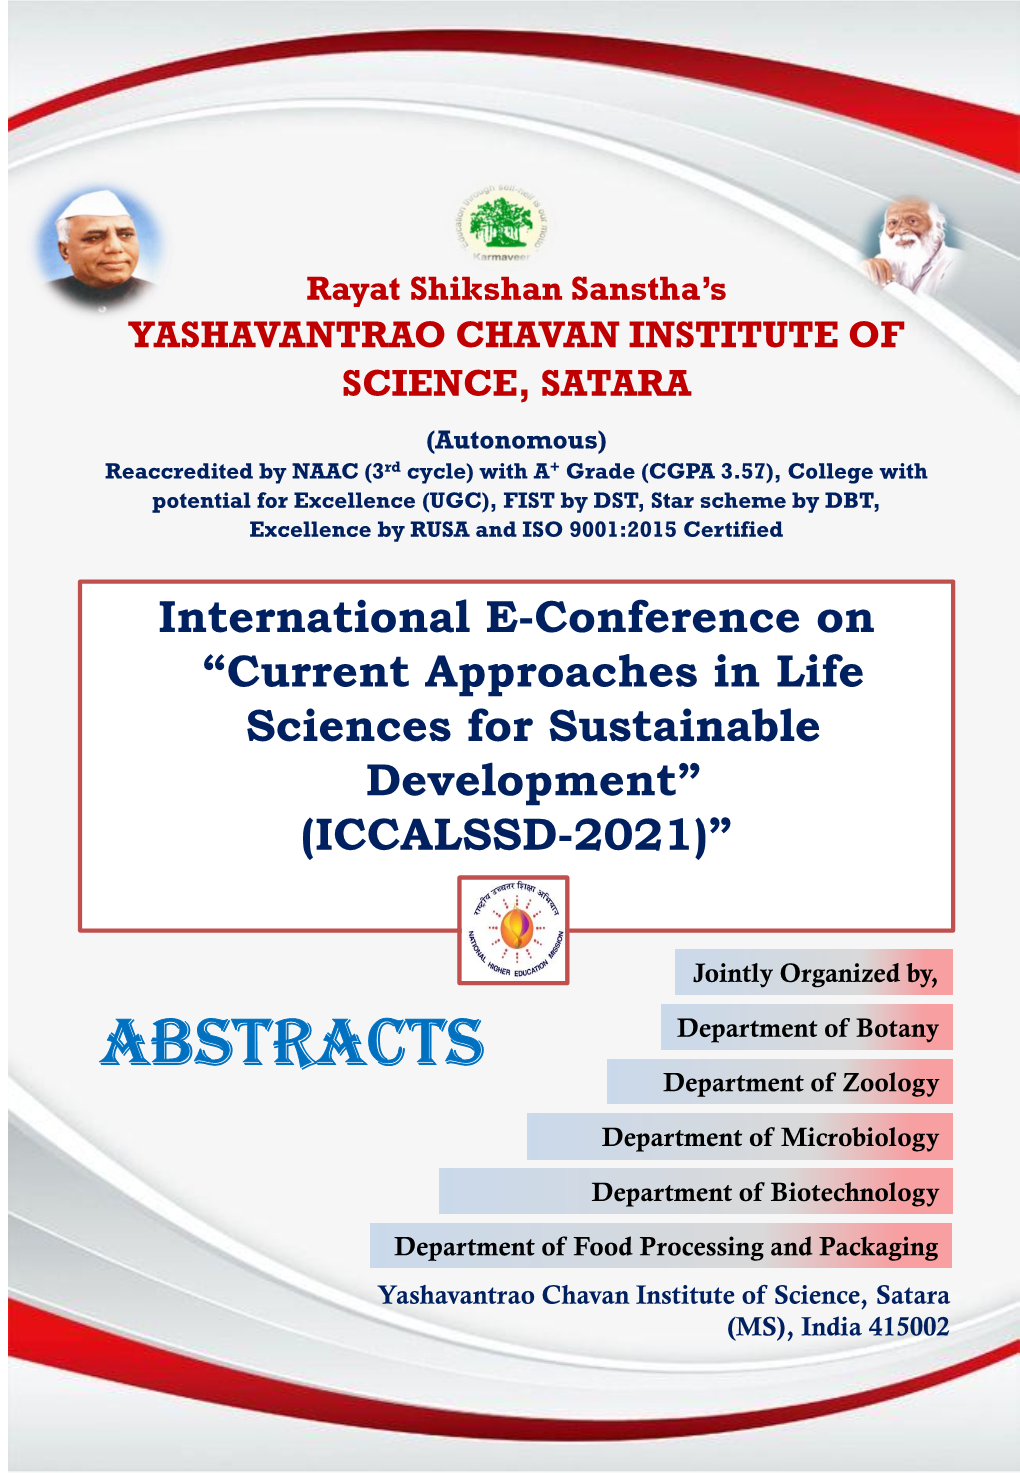 Current Approaches in Life Sciences for Sustainable Development” (ICCALSSD-2021)”